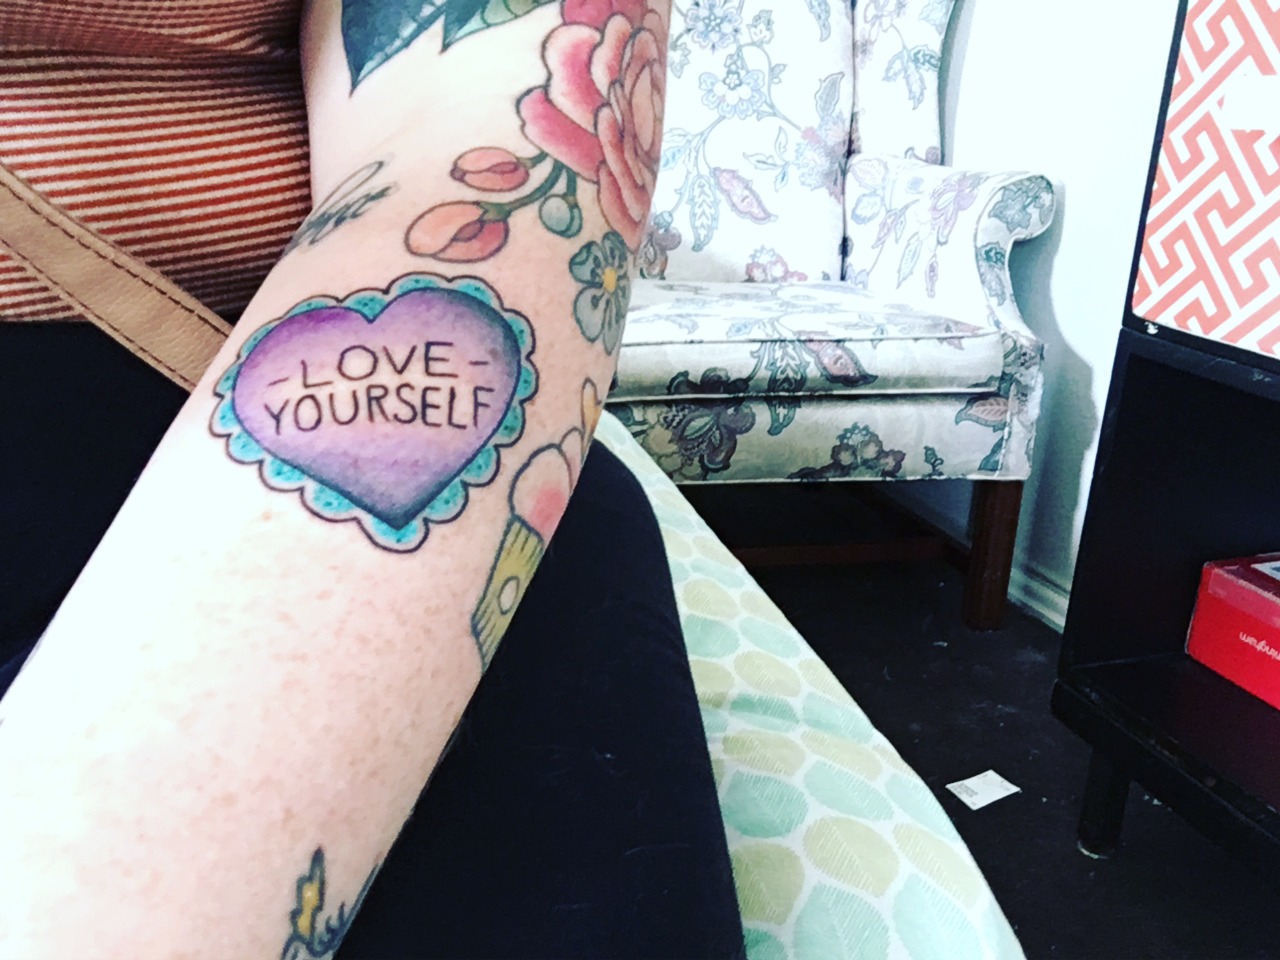  — “Love yourself” tattoo done by Wes at Fountain...